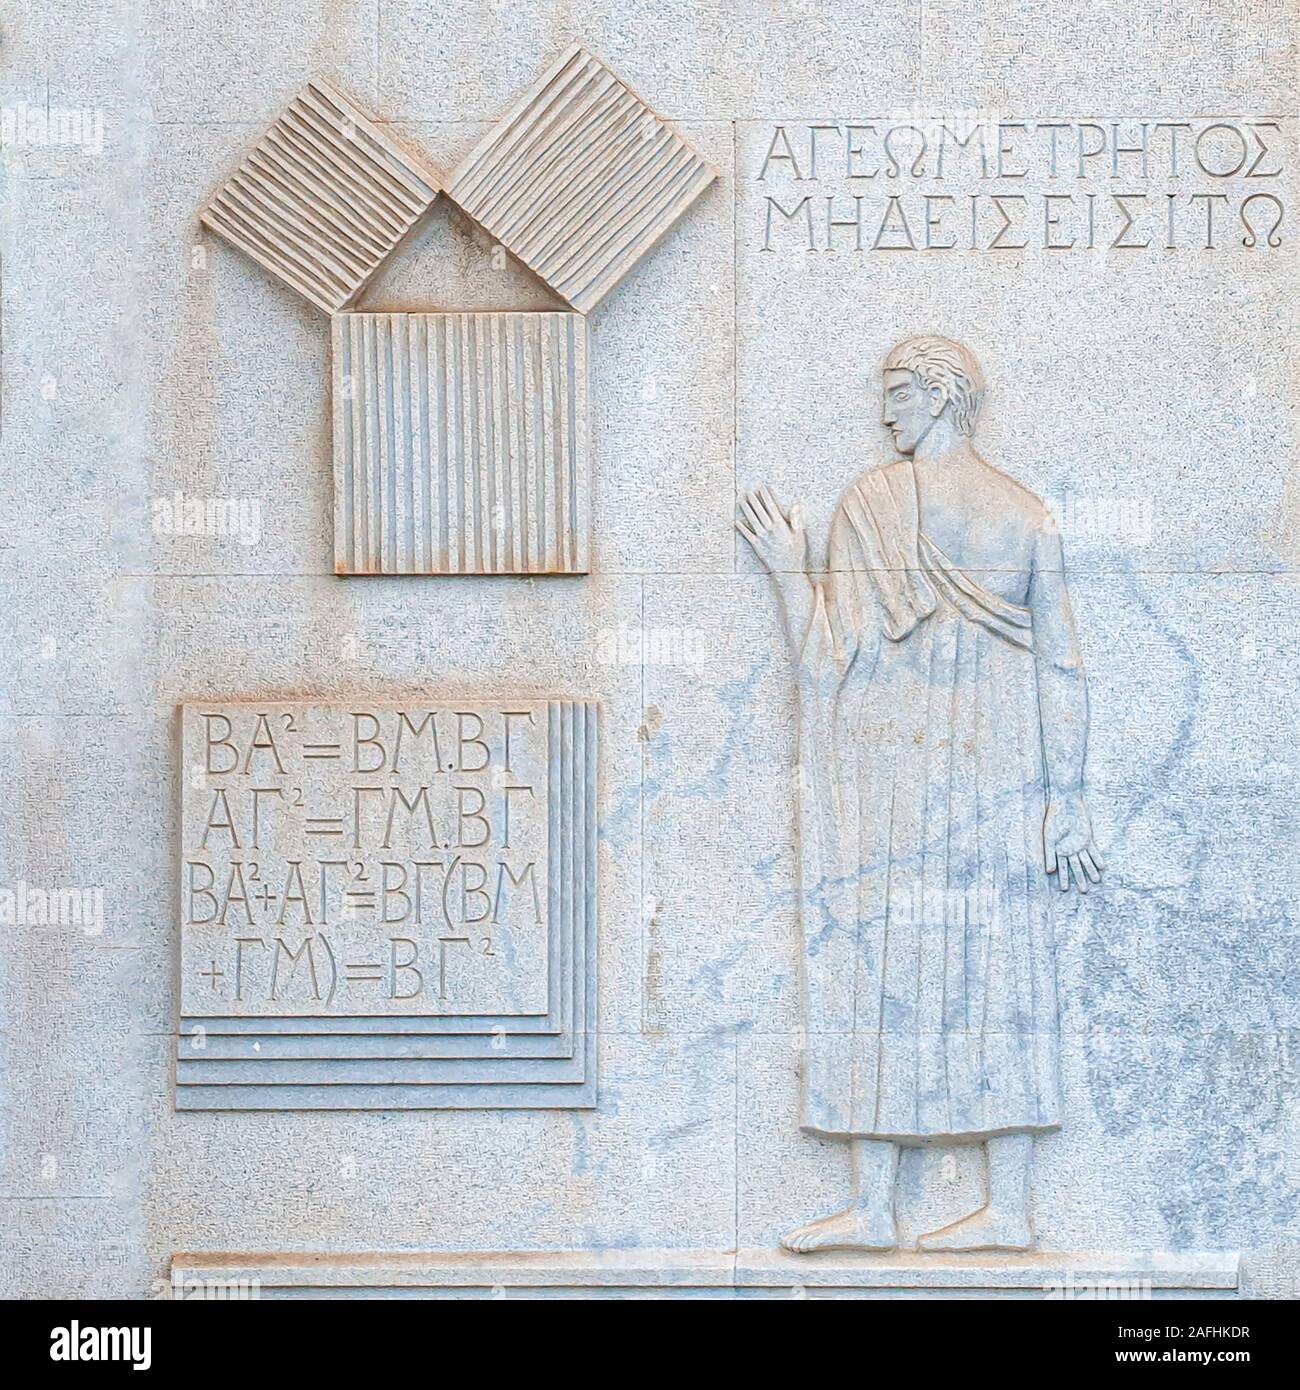 Bas-relief depicting Pythagoras and his theorem on the wall of the Faculty of Mathematics at the university of Coimbra, Coimbra, Portugal Stock Photo